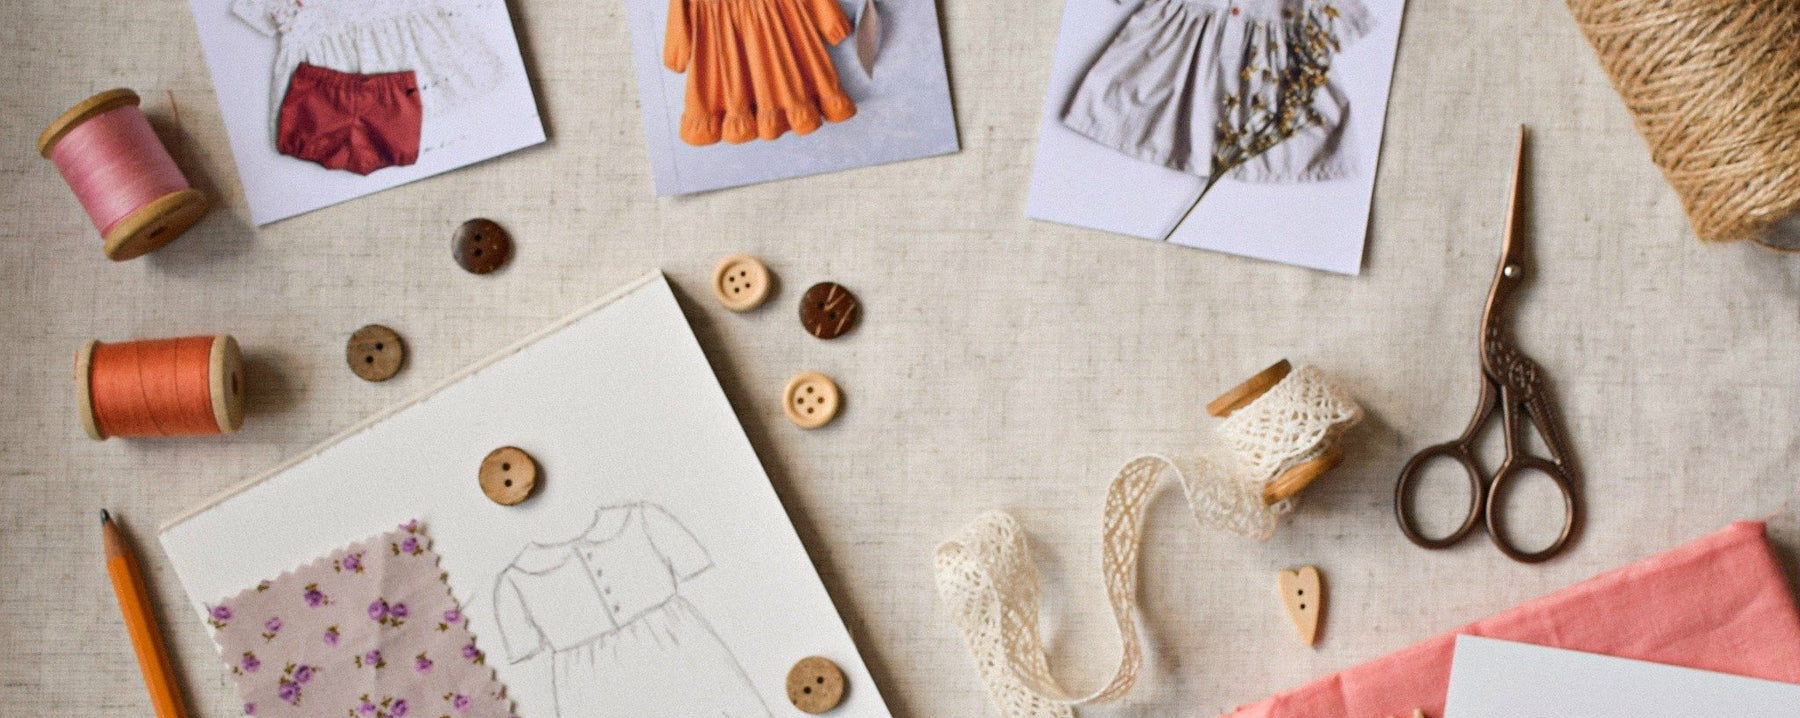 Photo of fashion sketches and sewing supplies on tabletop